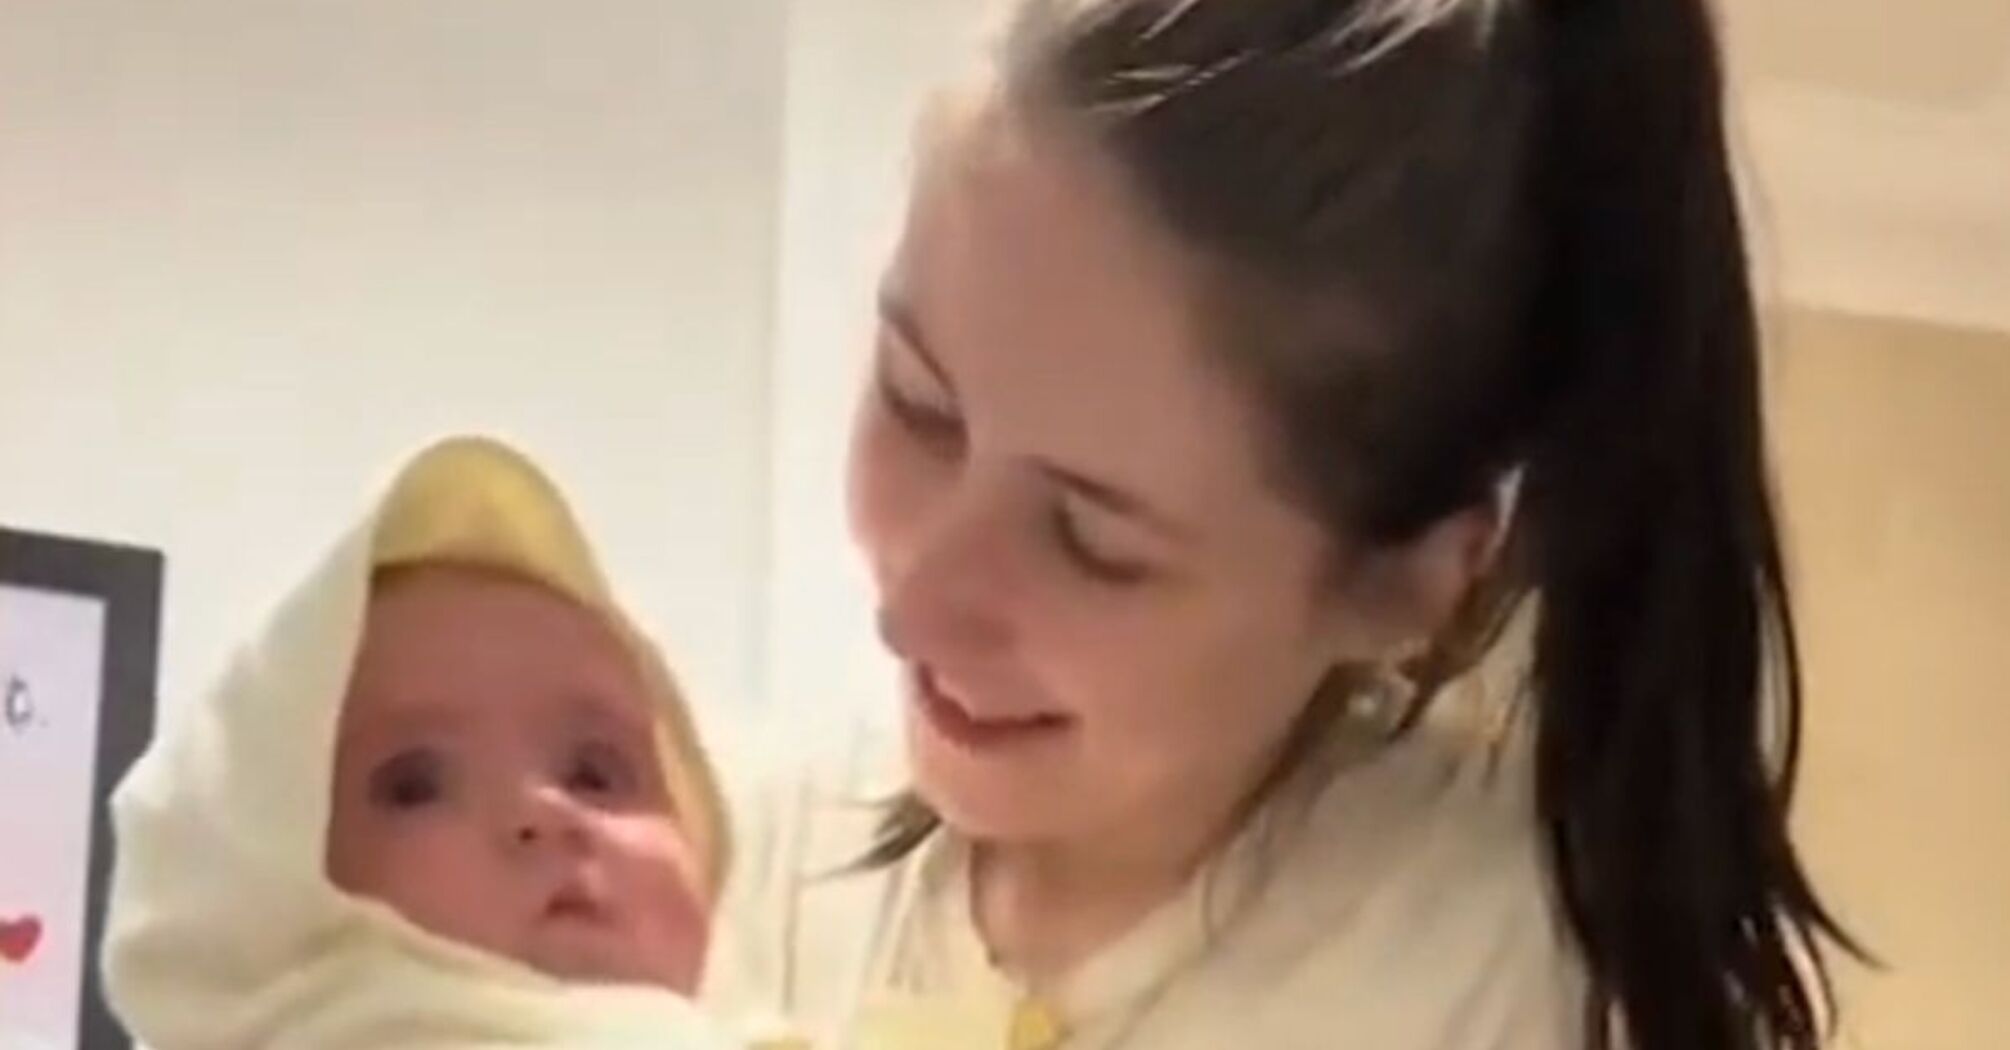 Mom was given the wrong baby in the maternity ward